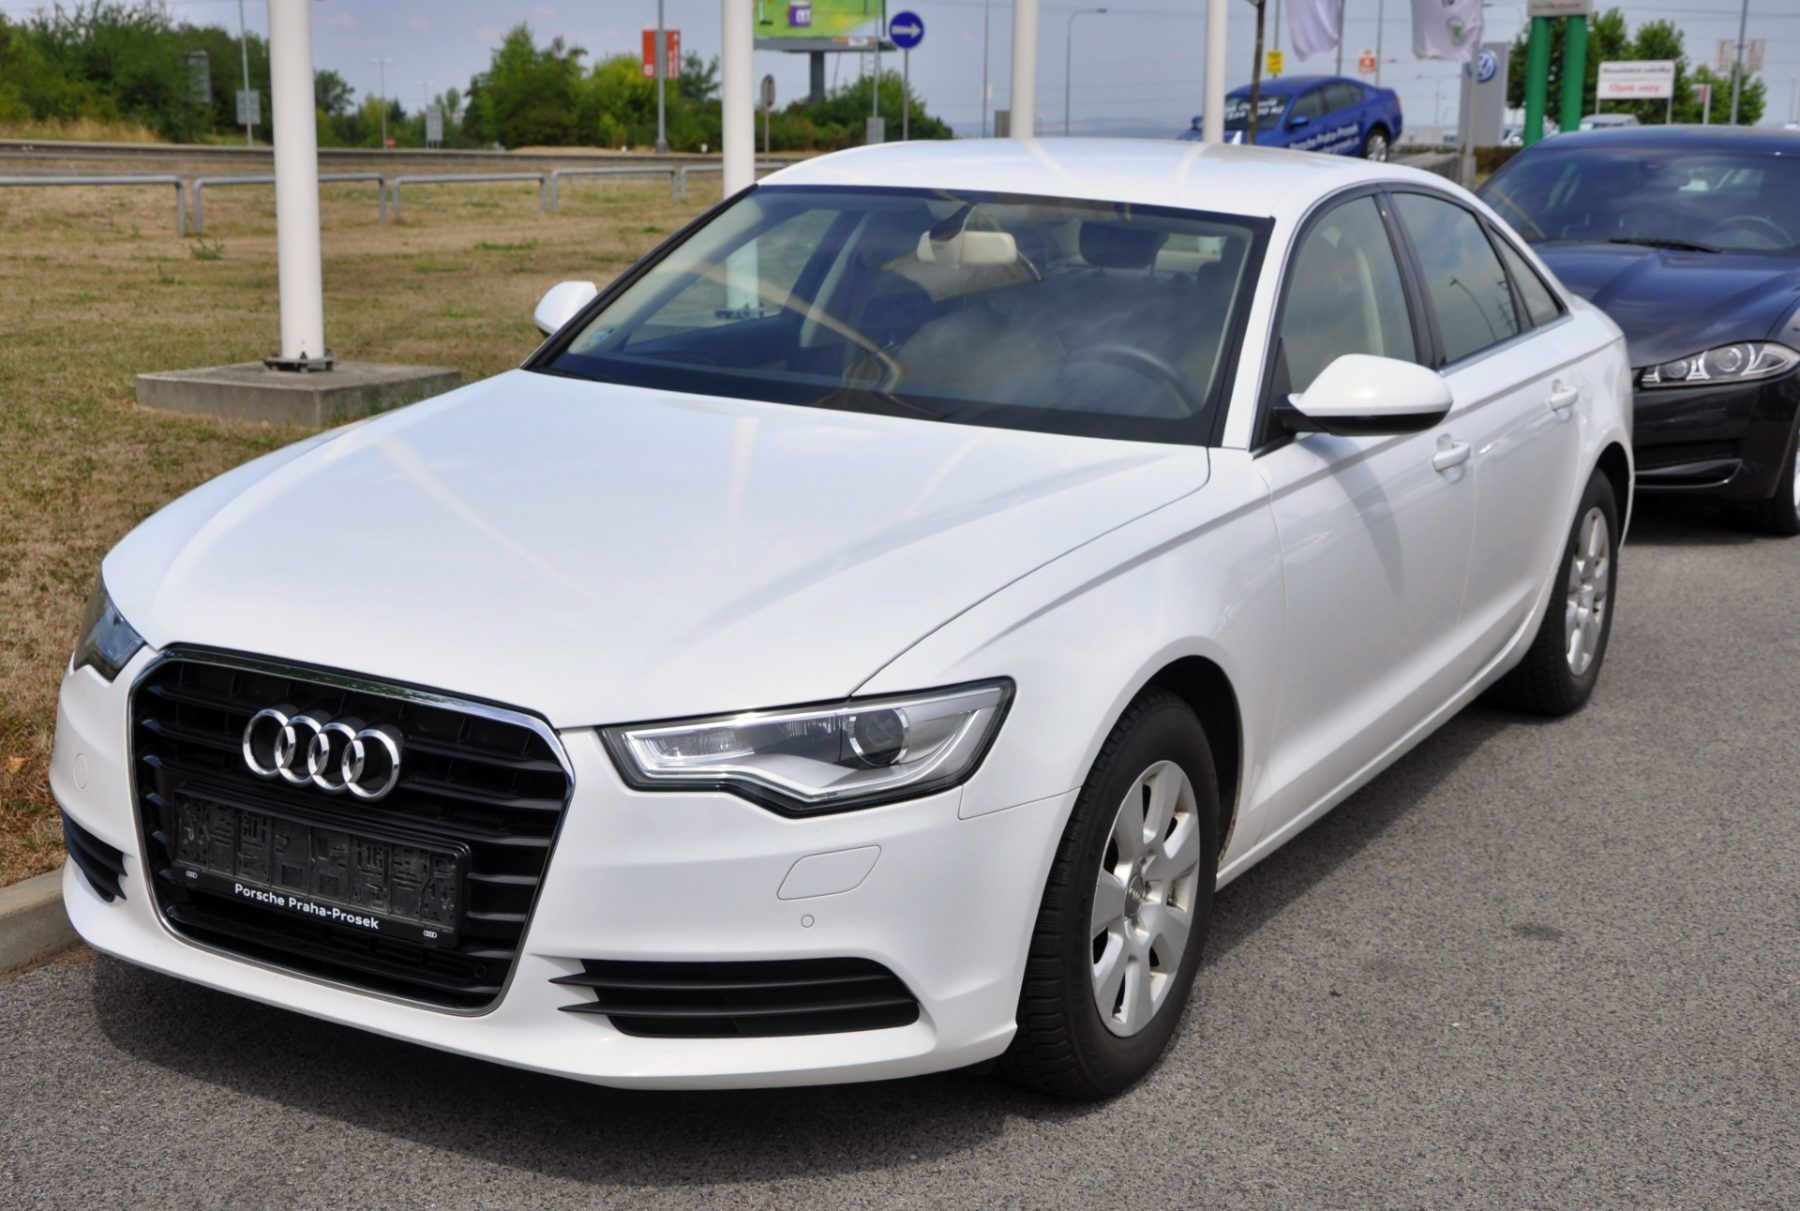 White Audi A6 - Audi class action claims atuomatic start/stop engine feature defective